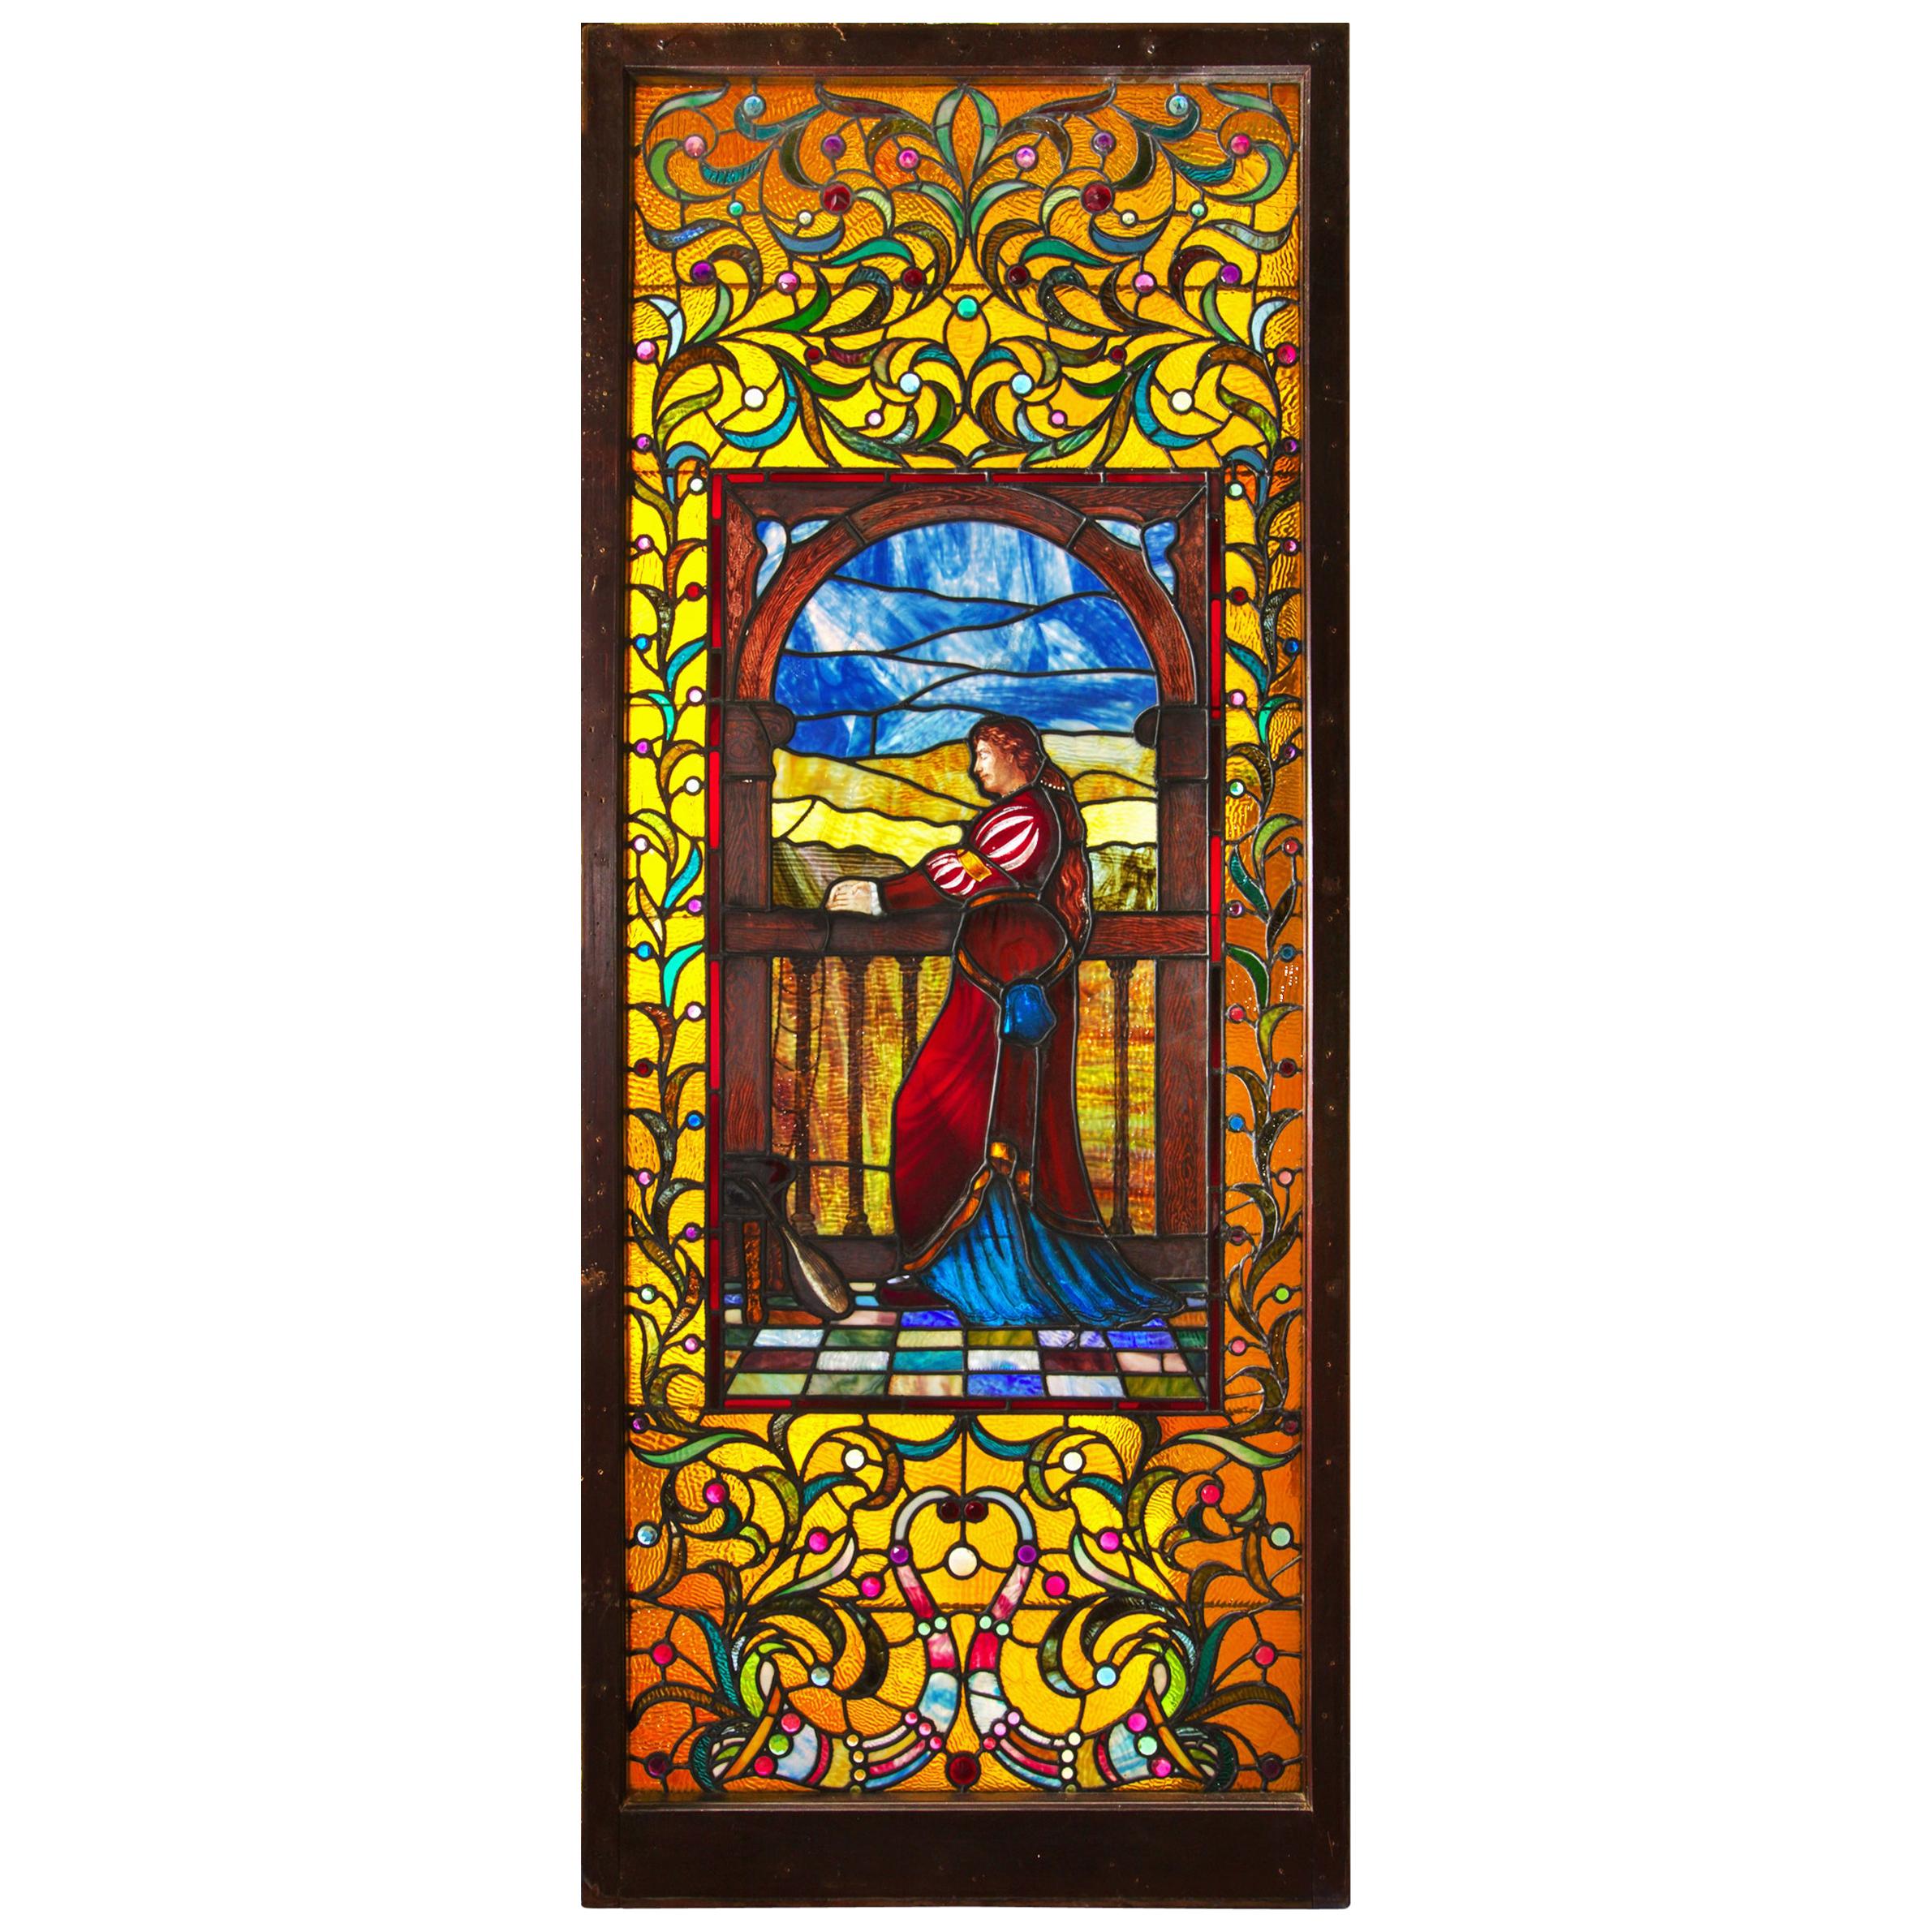 Large "Juliet" Stained Glass Window Panel circa 1915, Maker Unknown